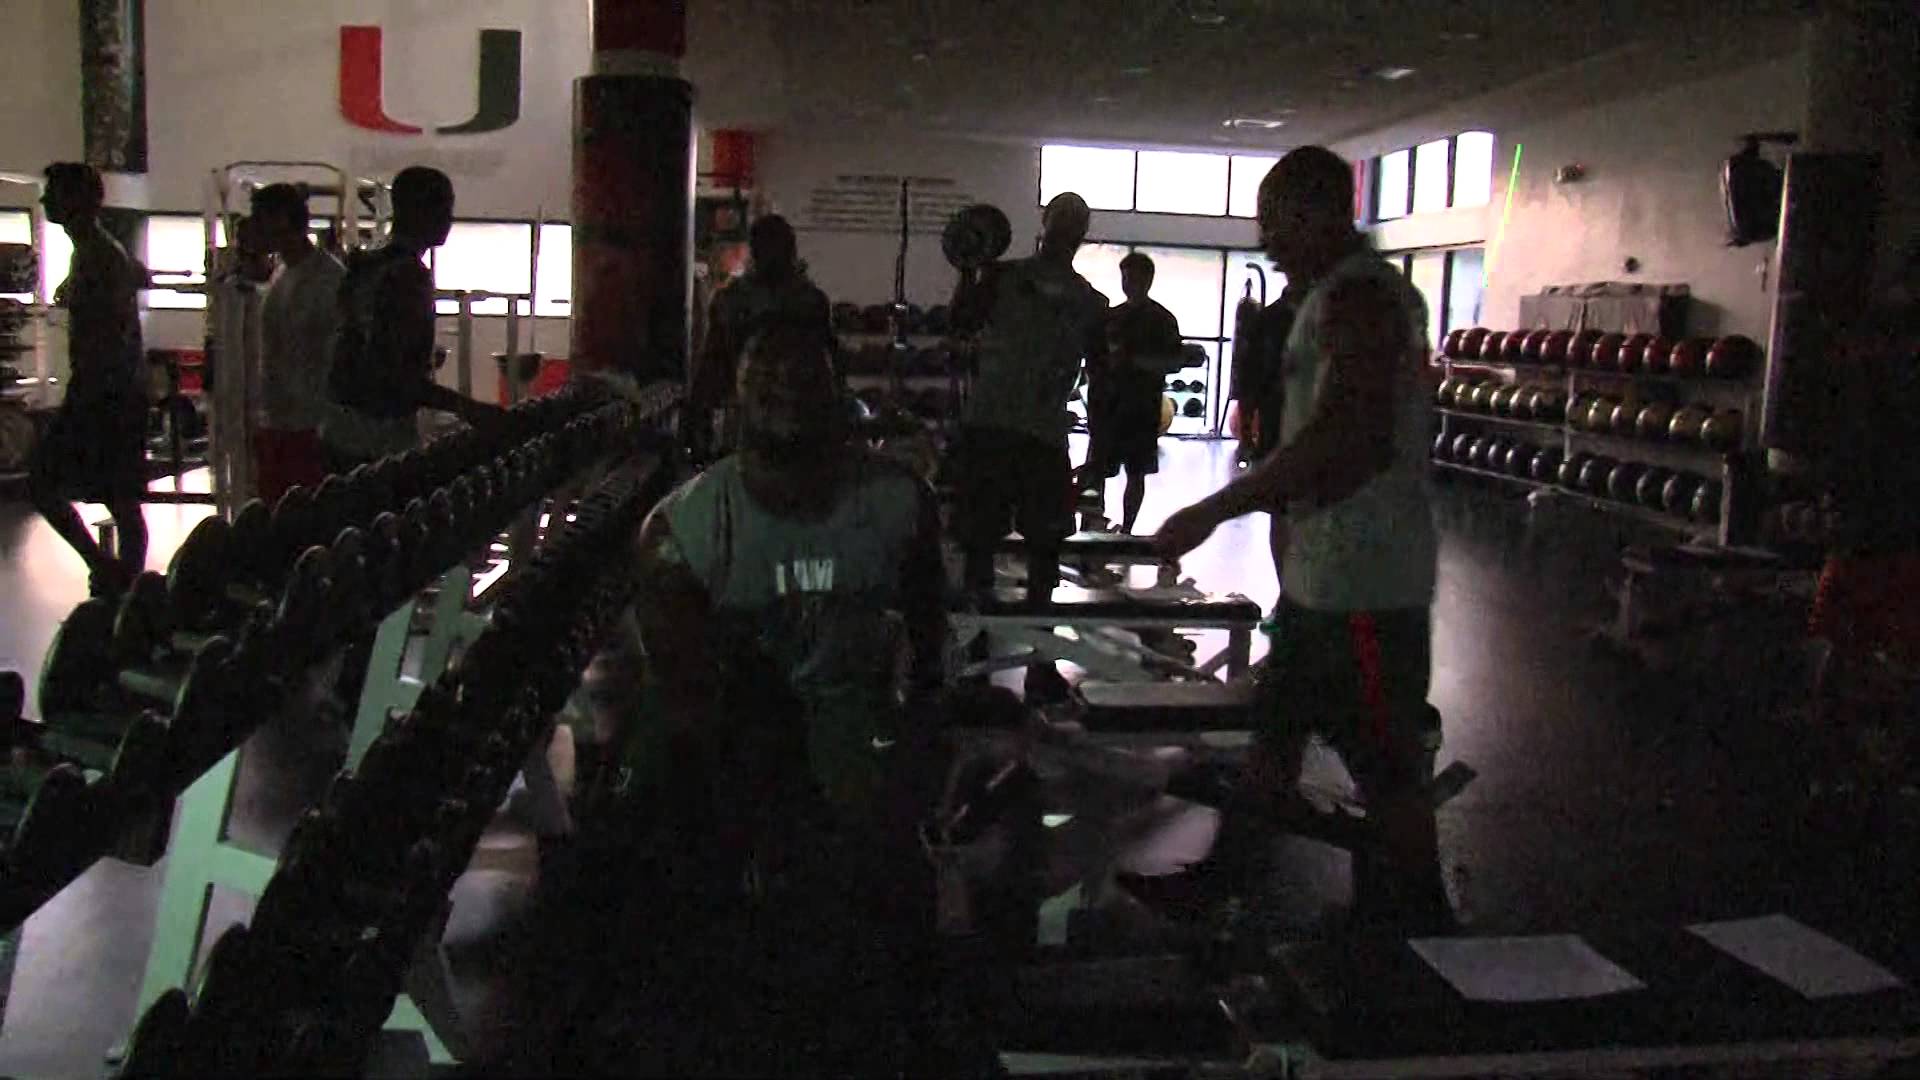 Univeristy of Miami football works out with Live DJ & Strobe Lights at 5:30am